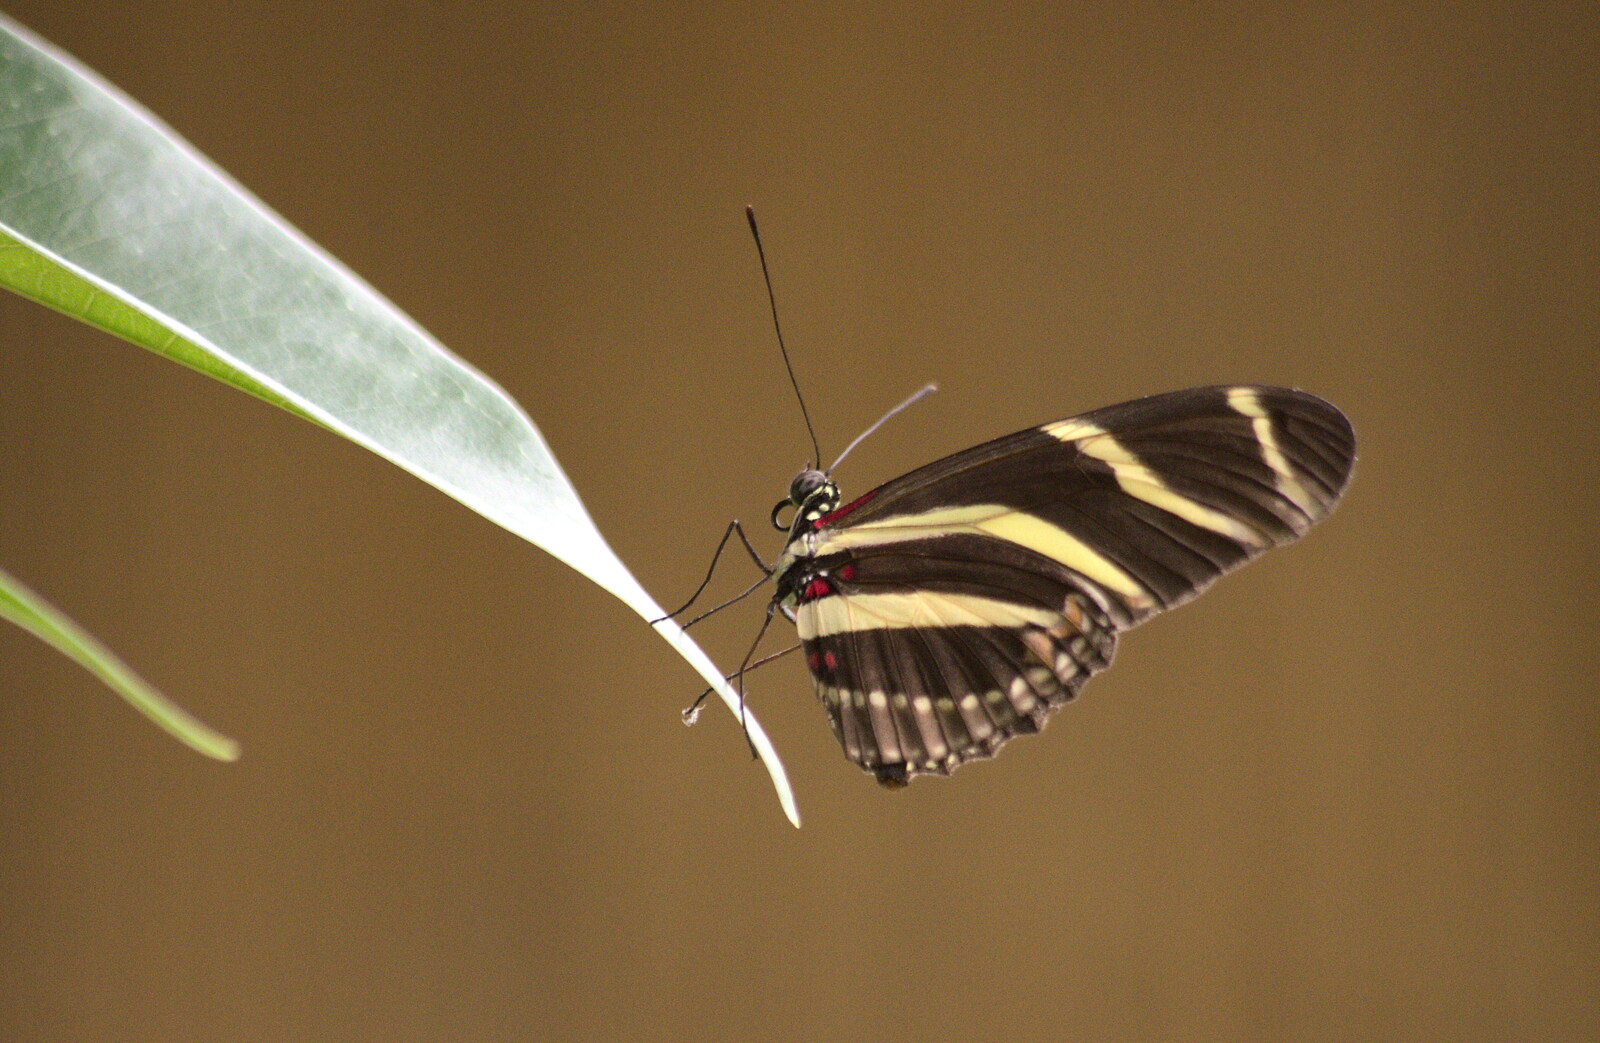 A Birthday Trip to the Zoo, Banham, Norfolk - 26th May 2014: A stripey butterfly on a leaf